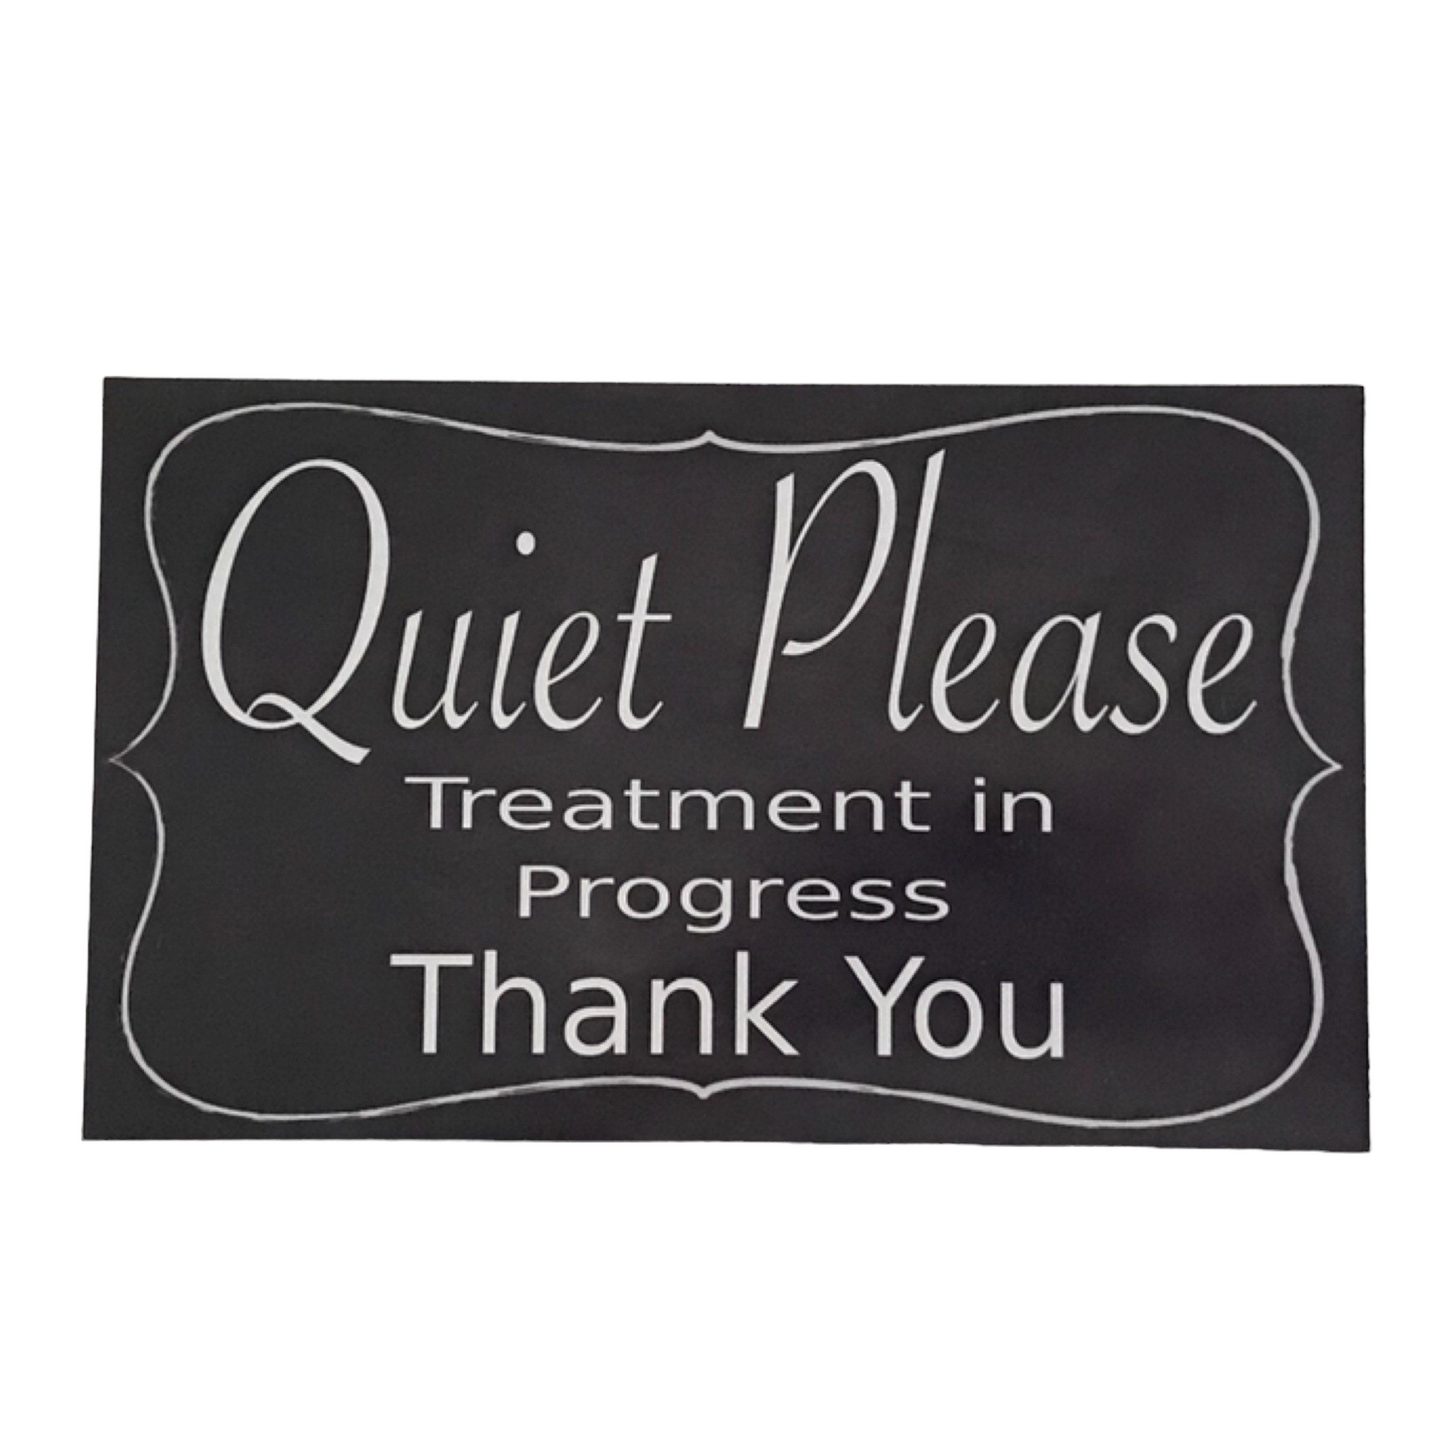 Quiet Please Clinic Treatment Massage Sign - The Renmy Store Homewares & Gifts 